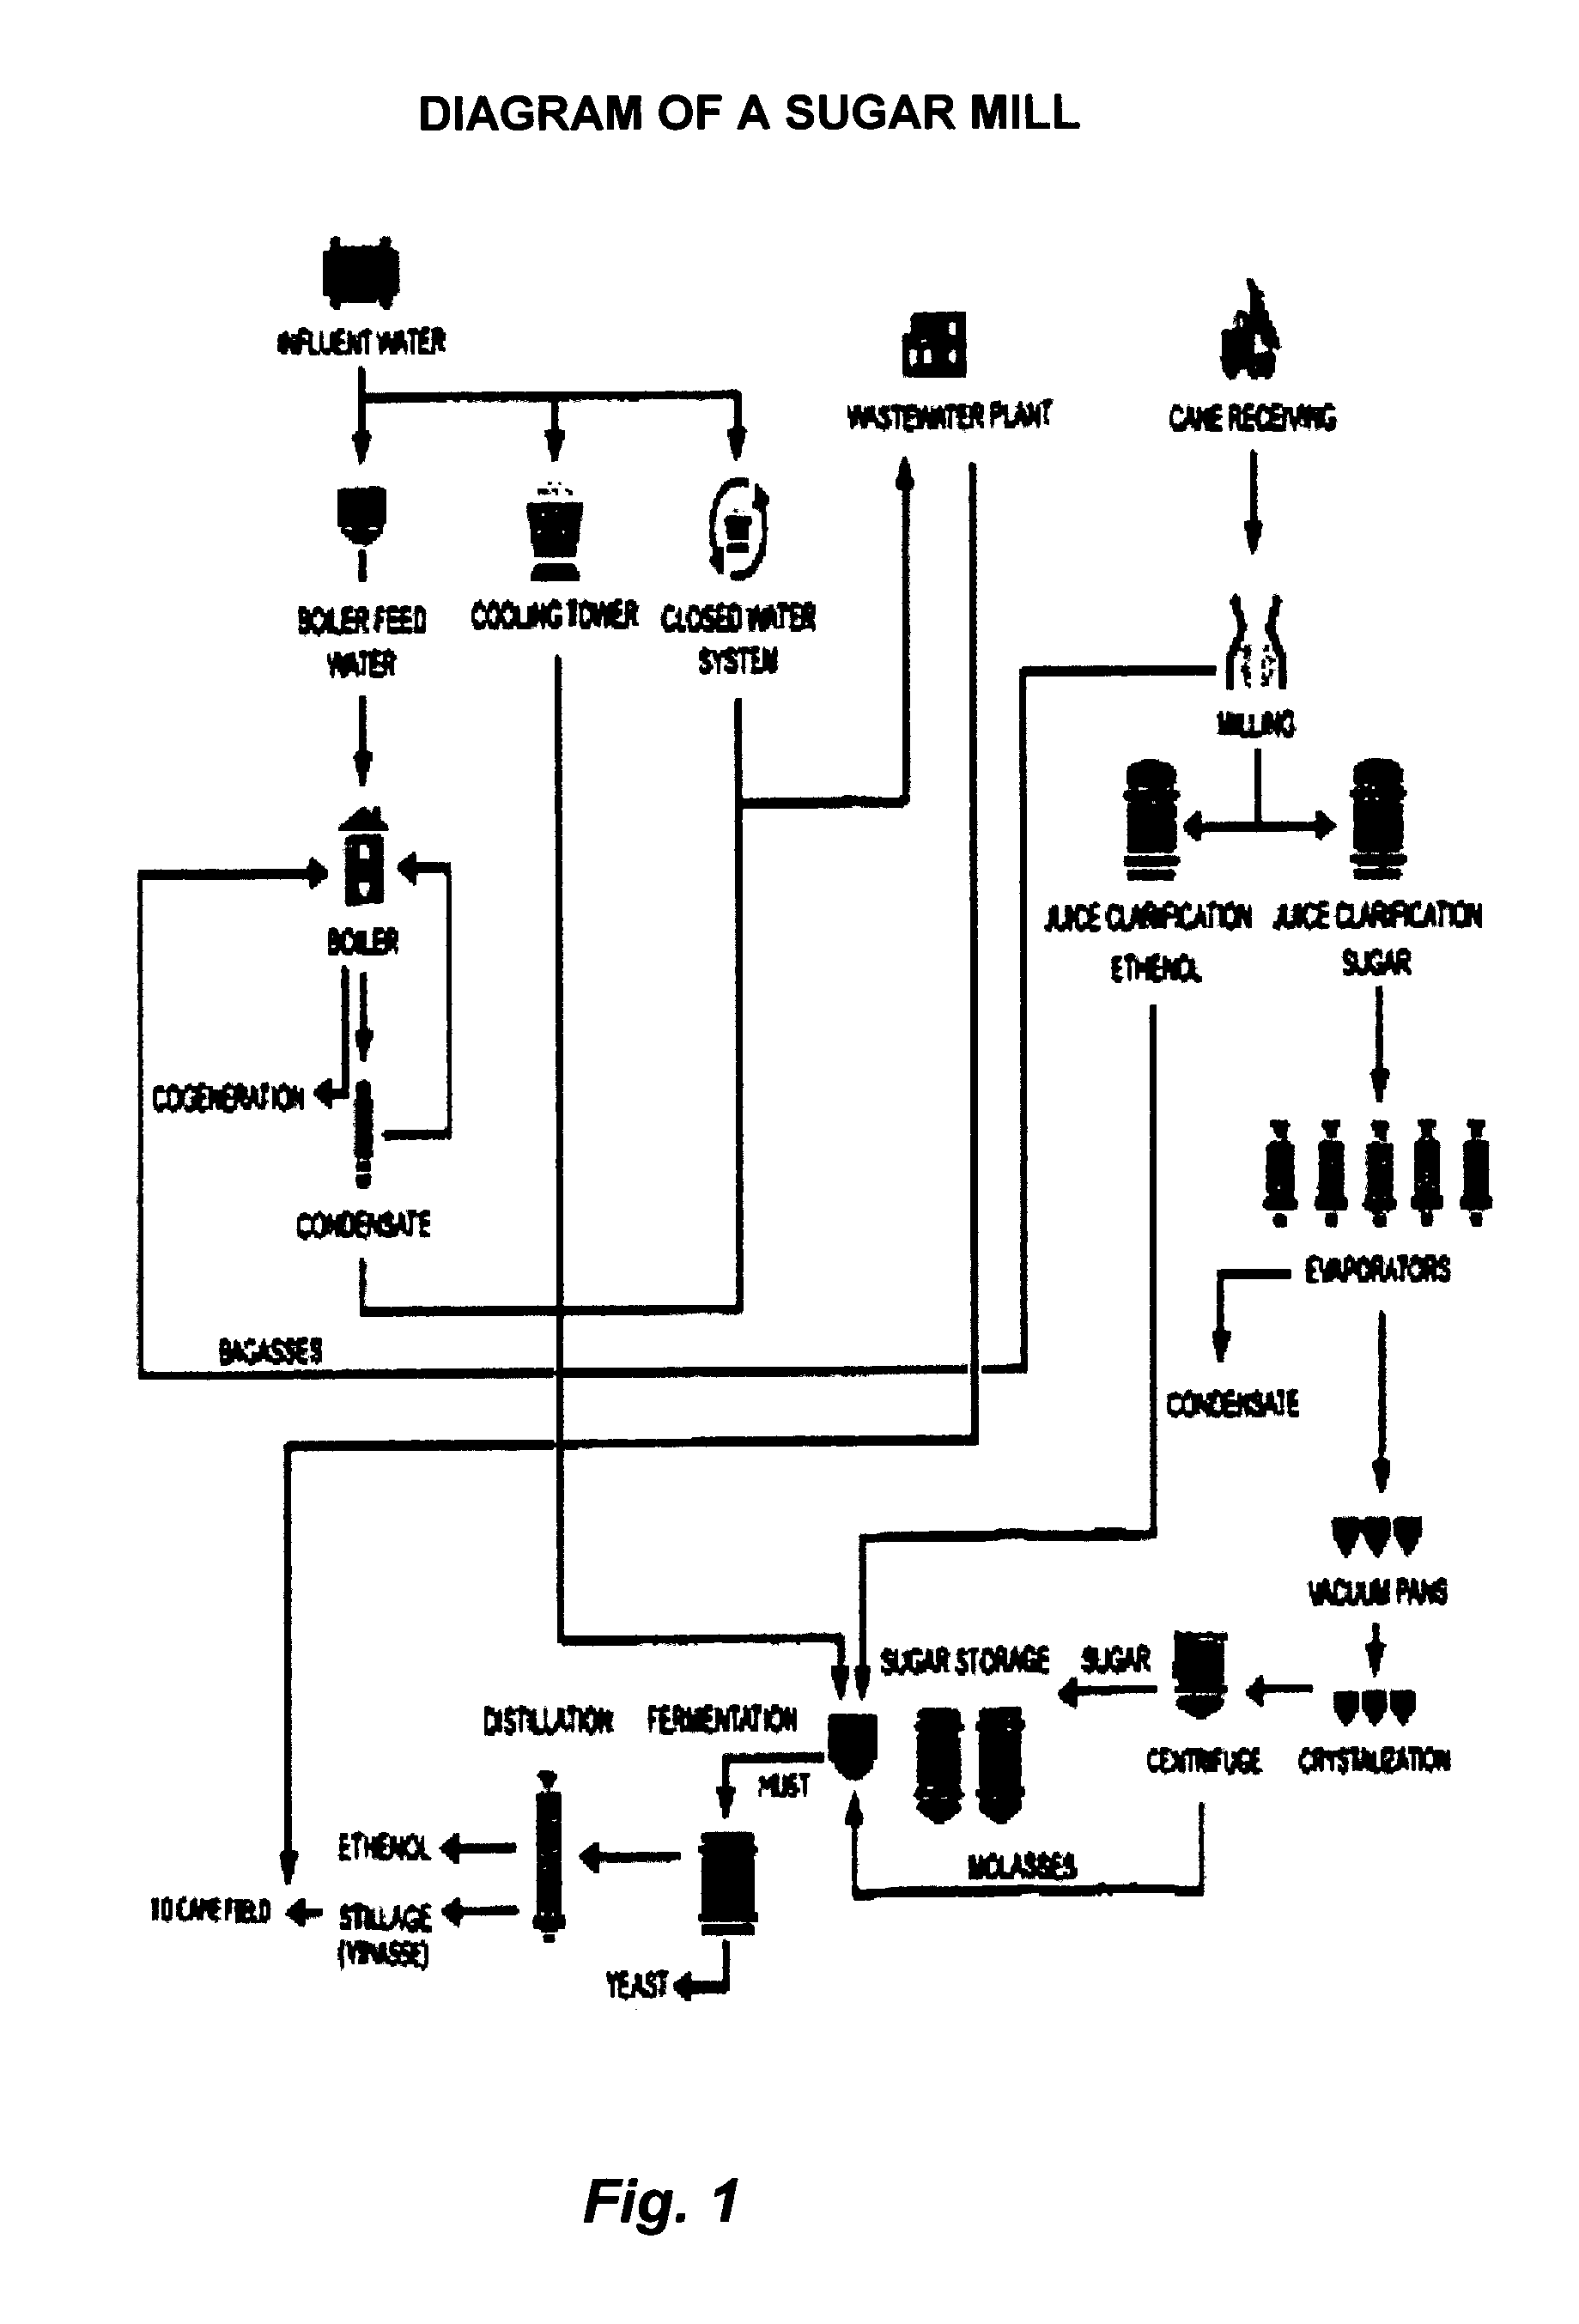 Method and composition for reducing the color of sugar